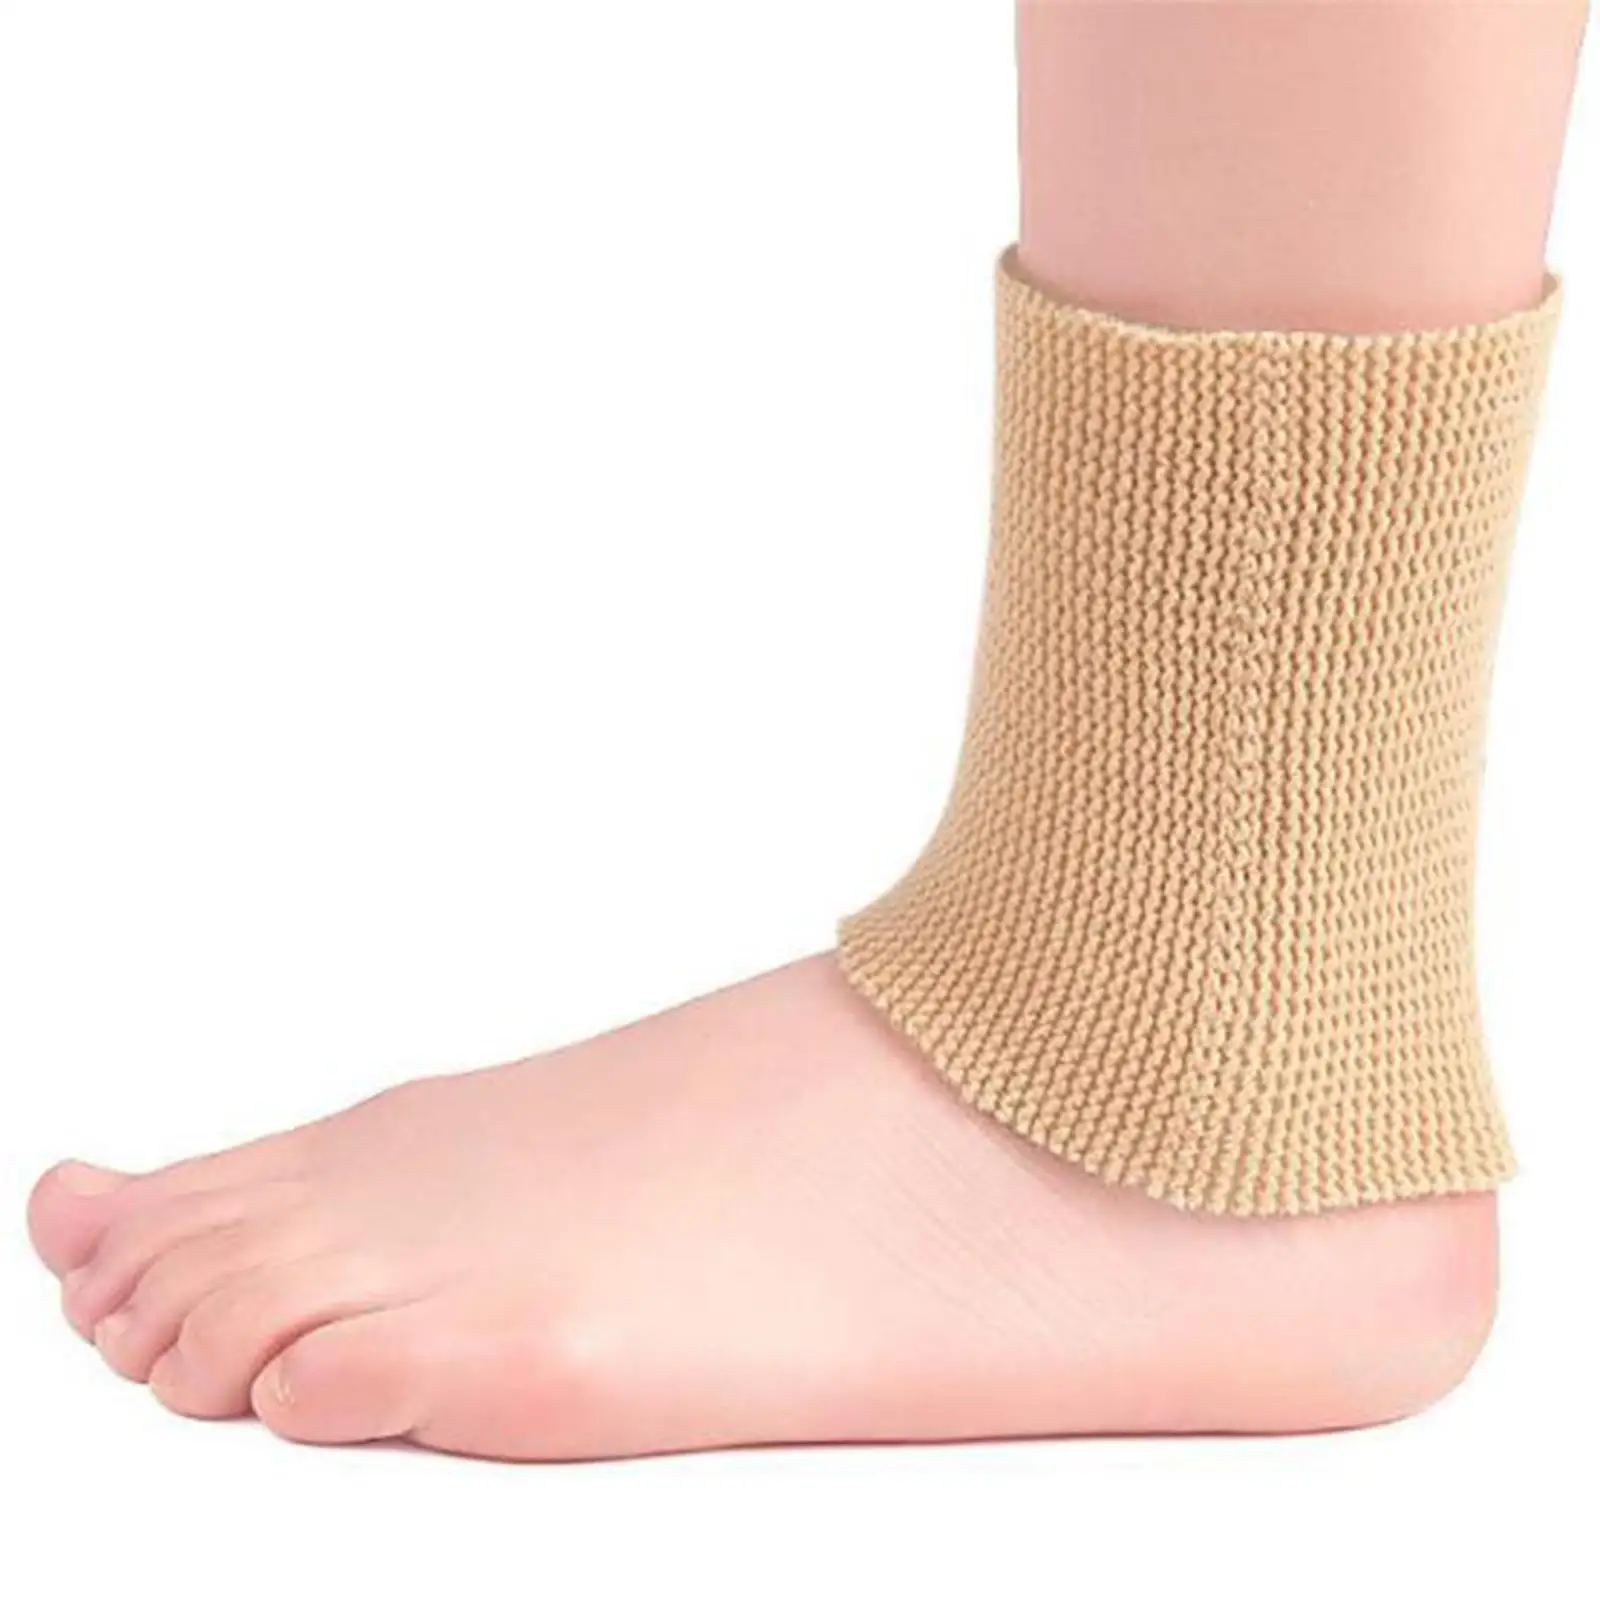 Ankles Brace Sleeve Elastic Protection Fasciitis Comfortable Nylon Ankle Support